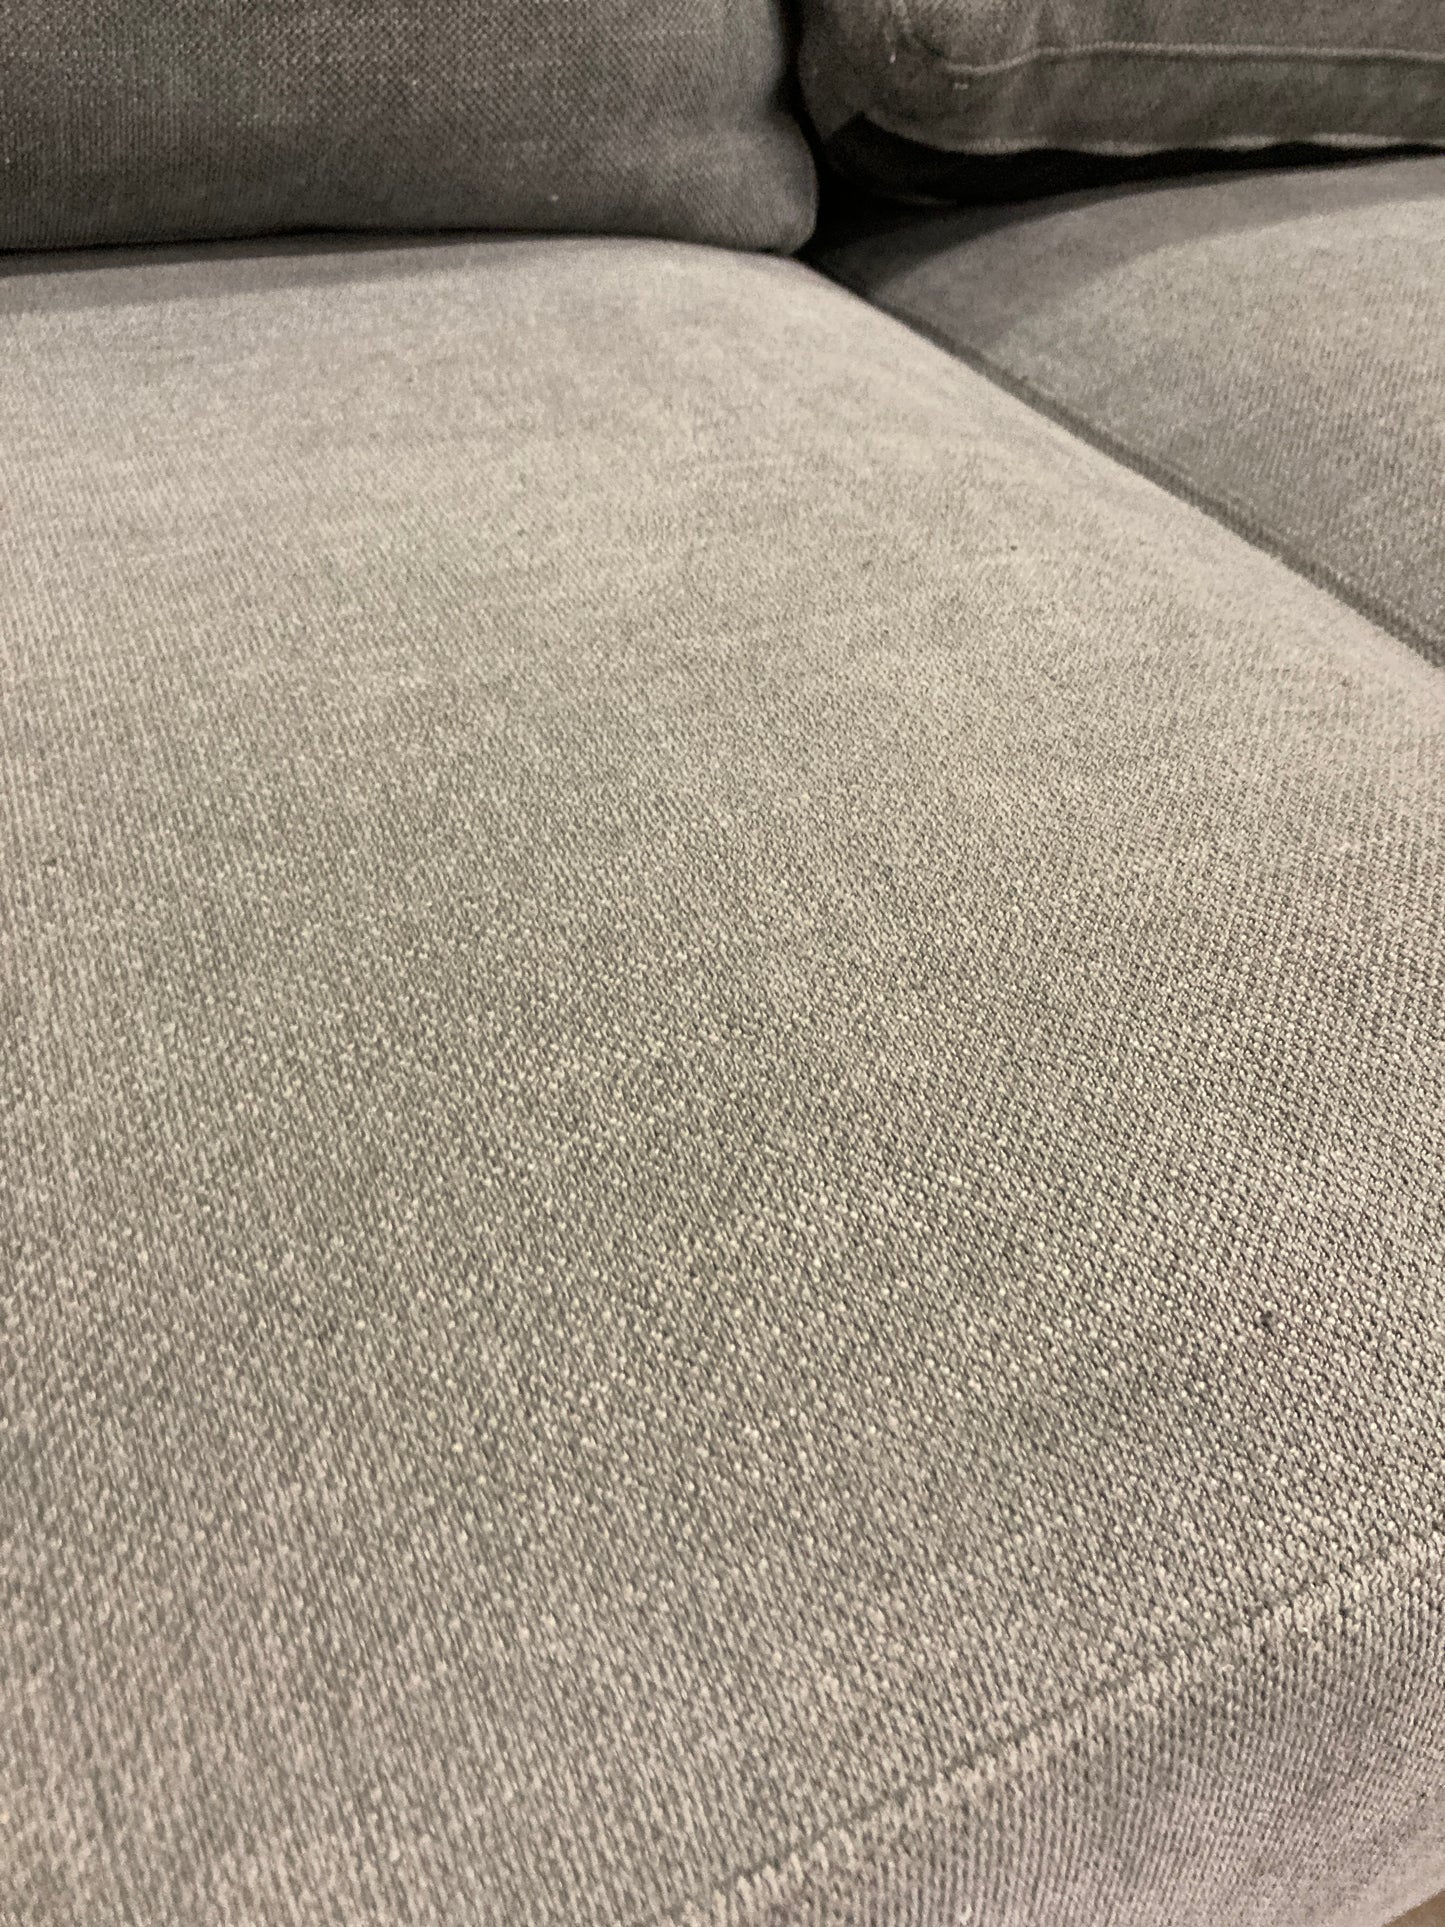 Costco - Ellery Fabric Sectional with Ottoman - Retail $799